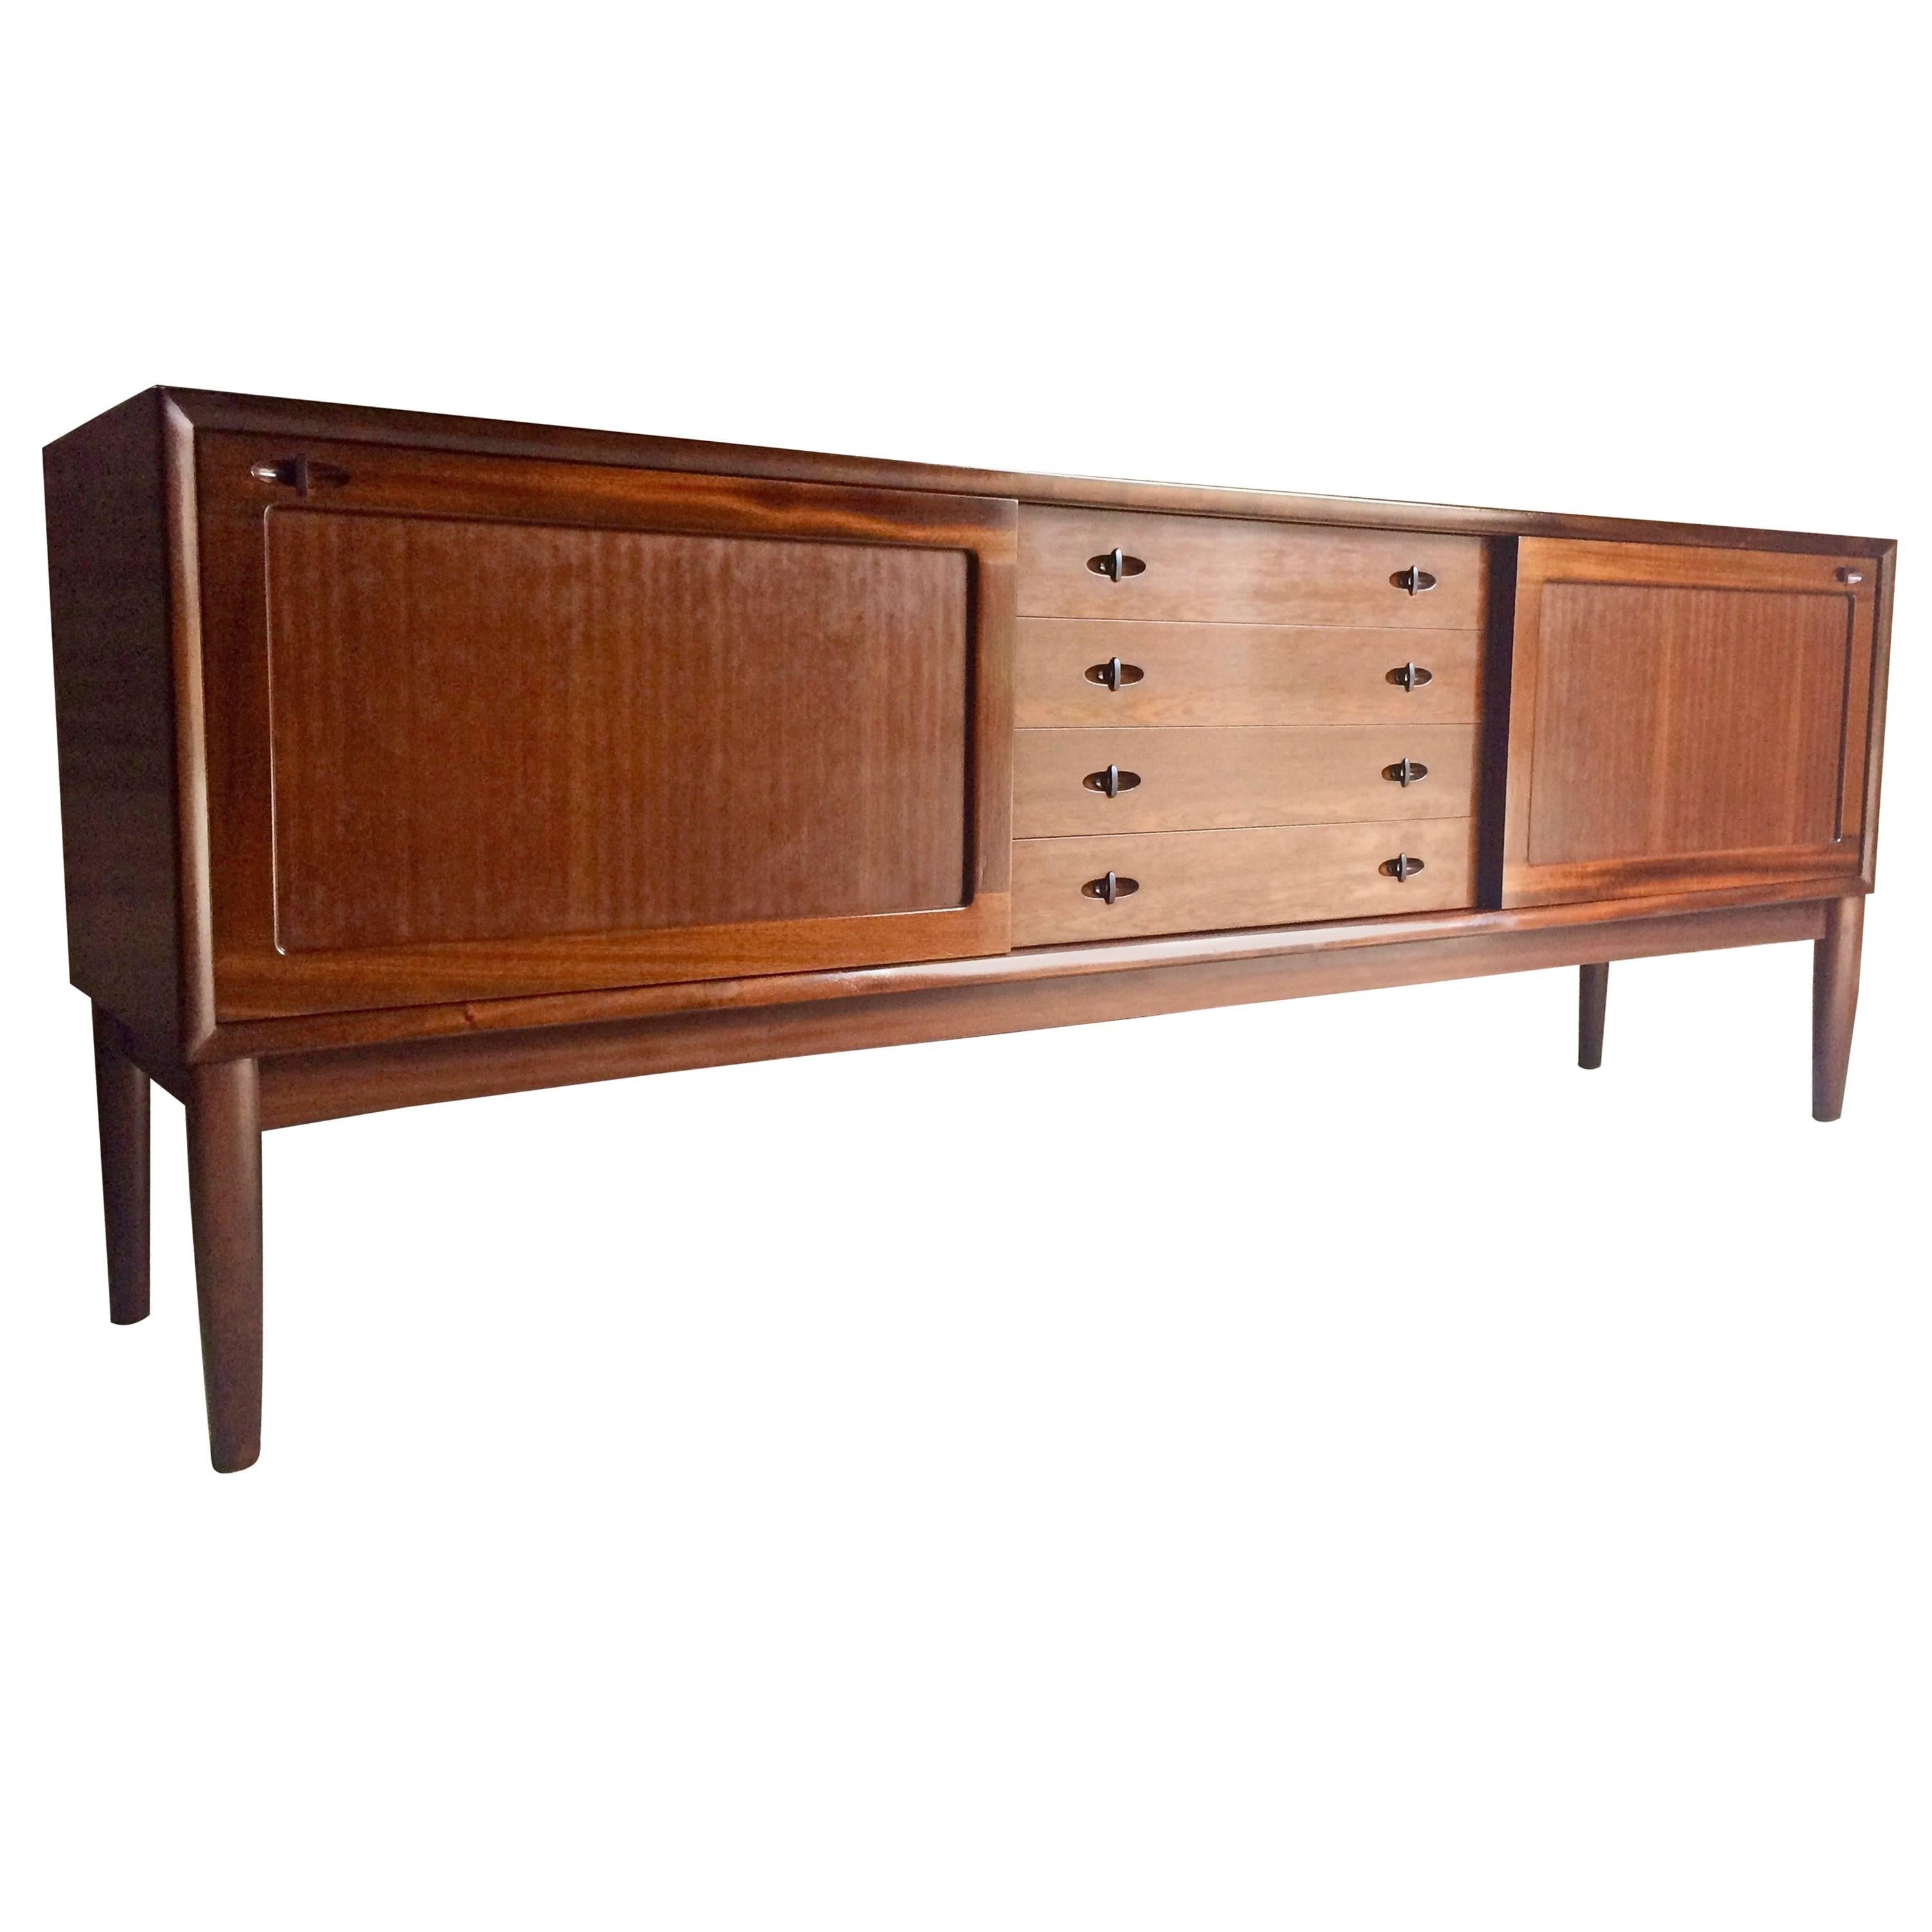 Magnificent Classic Danish modern midcentury solid dark teak sideboard credenza designed by H.W. Klein and manufactured by Bramin, the rectangular top over two large sliding doors with adjustable interior shelving, flanking a flight of four central